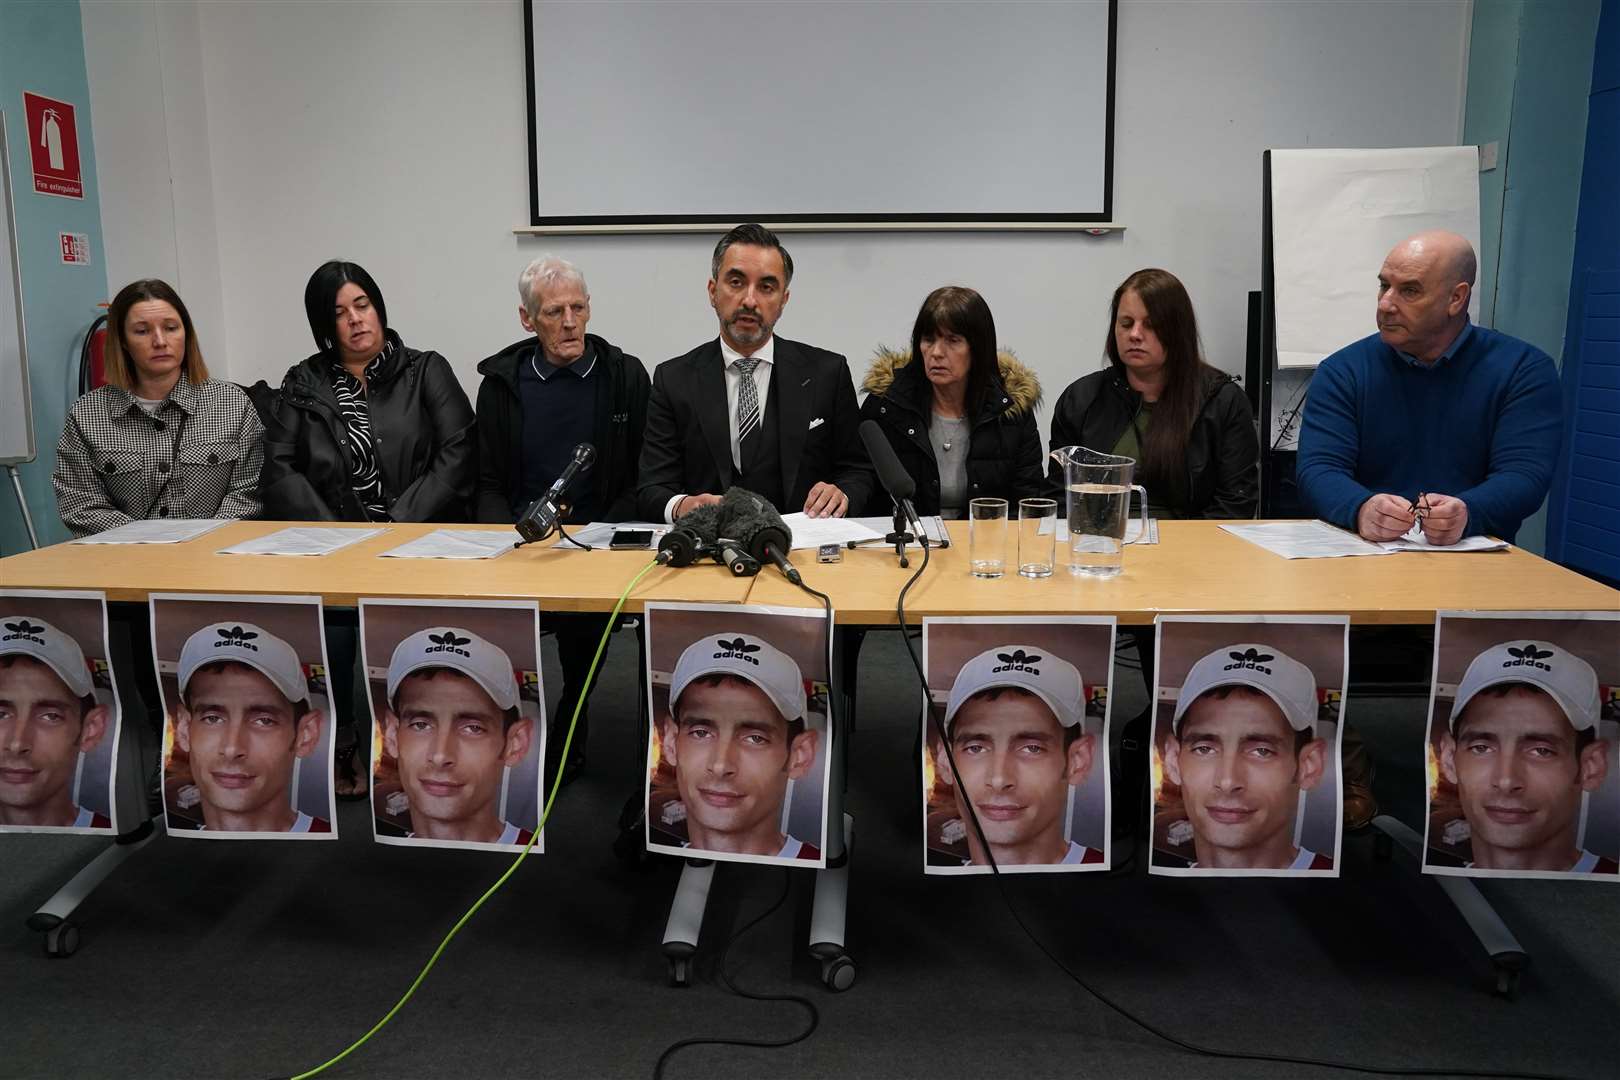 The family of Joseph Sneddon, left to right, sisters Gillian Sinclair and Kerry Sneddon, father James Sneddon, family solicitor Aamer Anwar, mother Jane Sneddon, sister Laura Sneddon, and uncle James Scougall, during a press conference at Edinburgh Central Library (Andrew Milligan/PA)